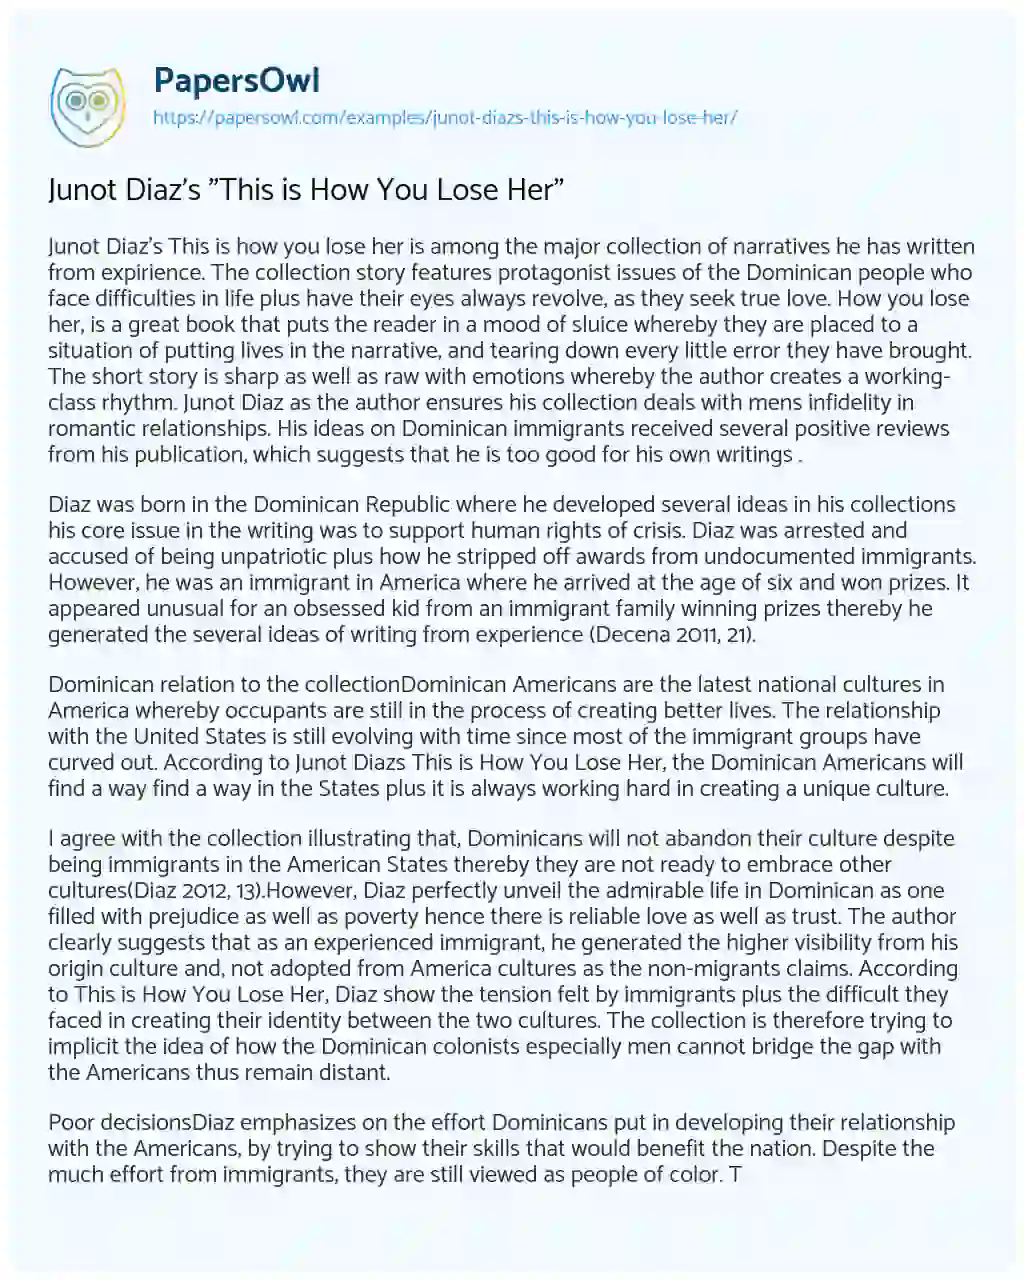 Essay on Junot Diaz’s “This is how you Lose Her”